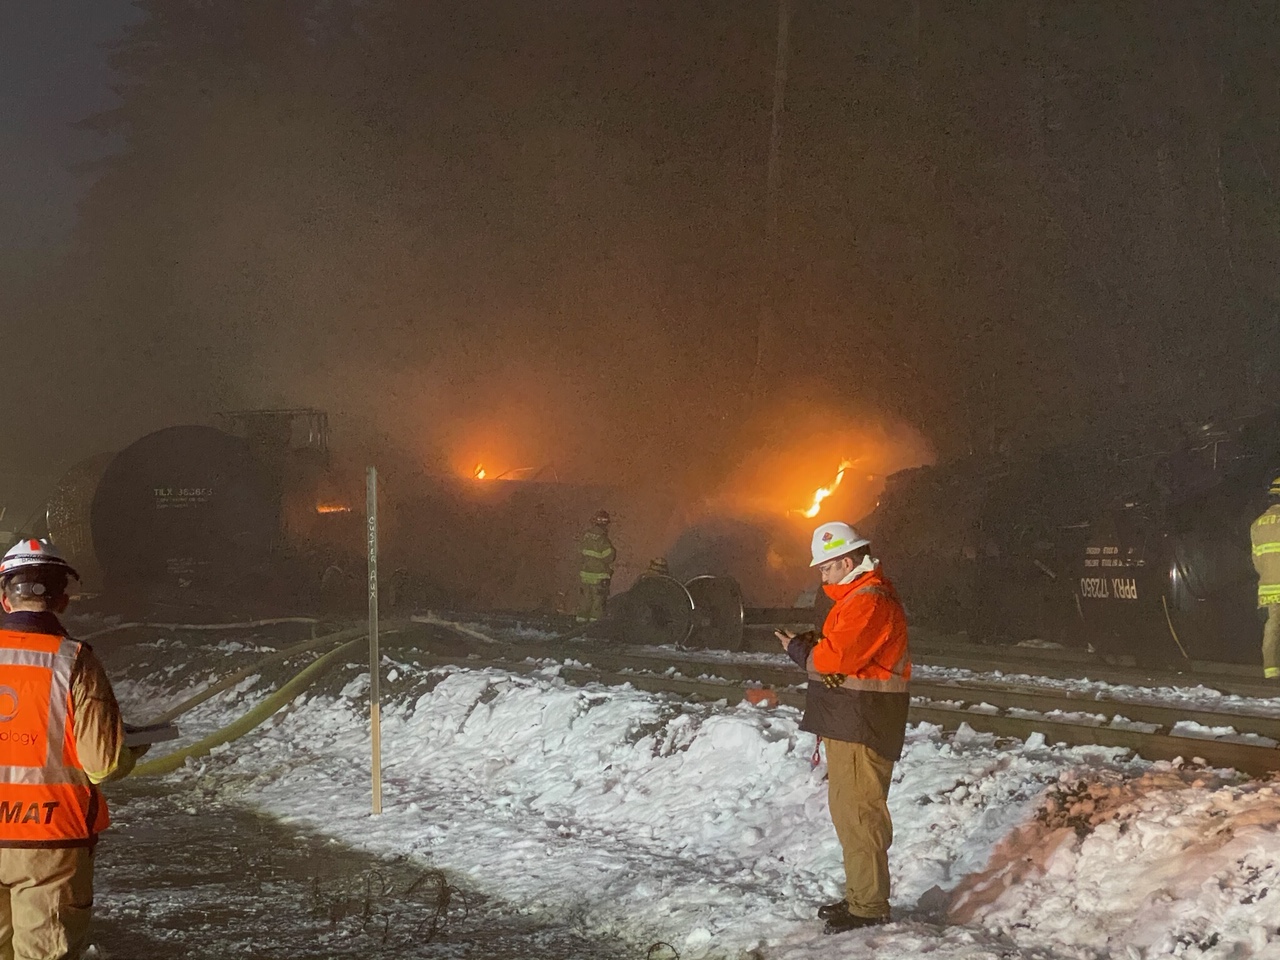 Firefighters standing in front of a derailed train